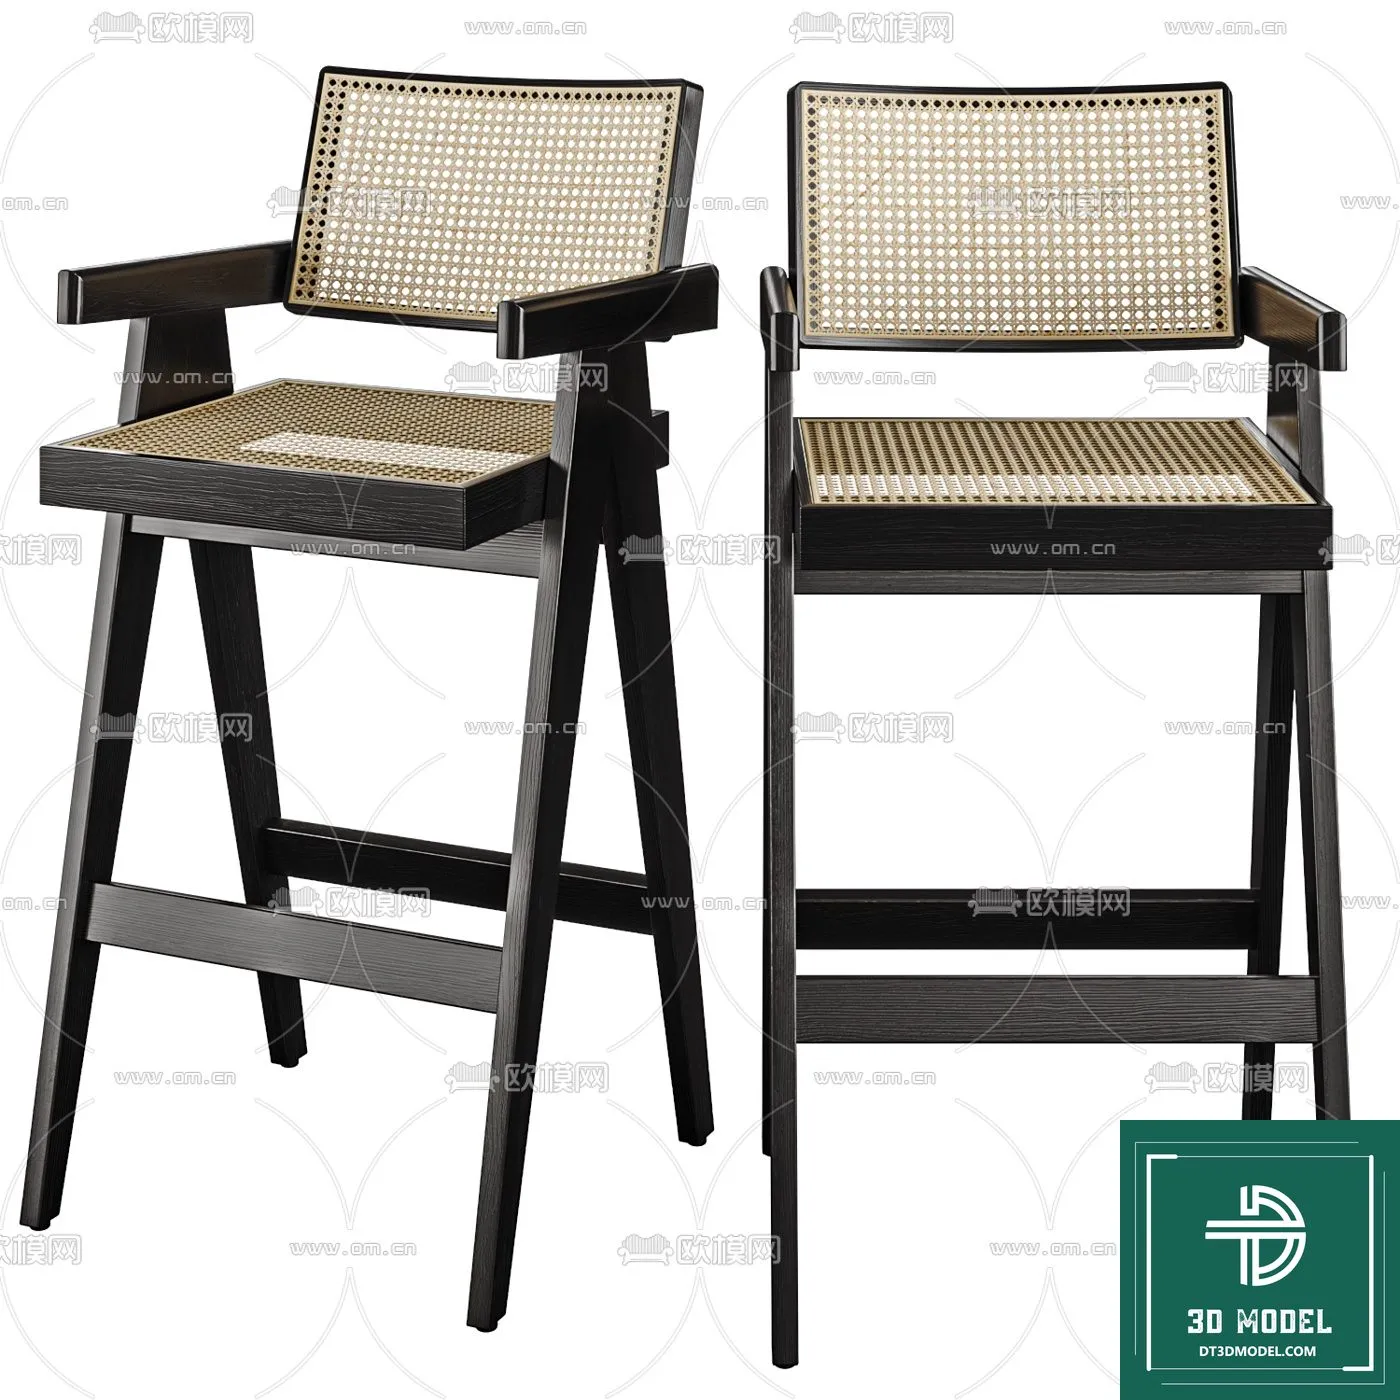 INDOCHINE STYLE – 3D MODELS – 006